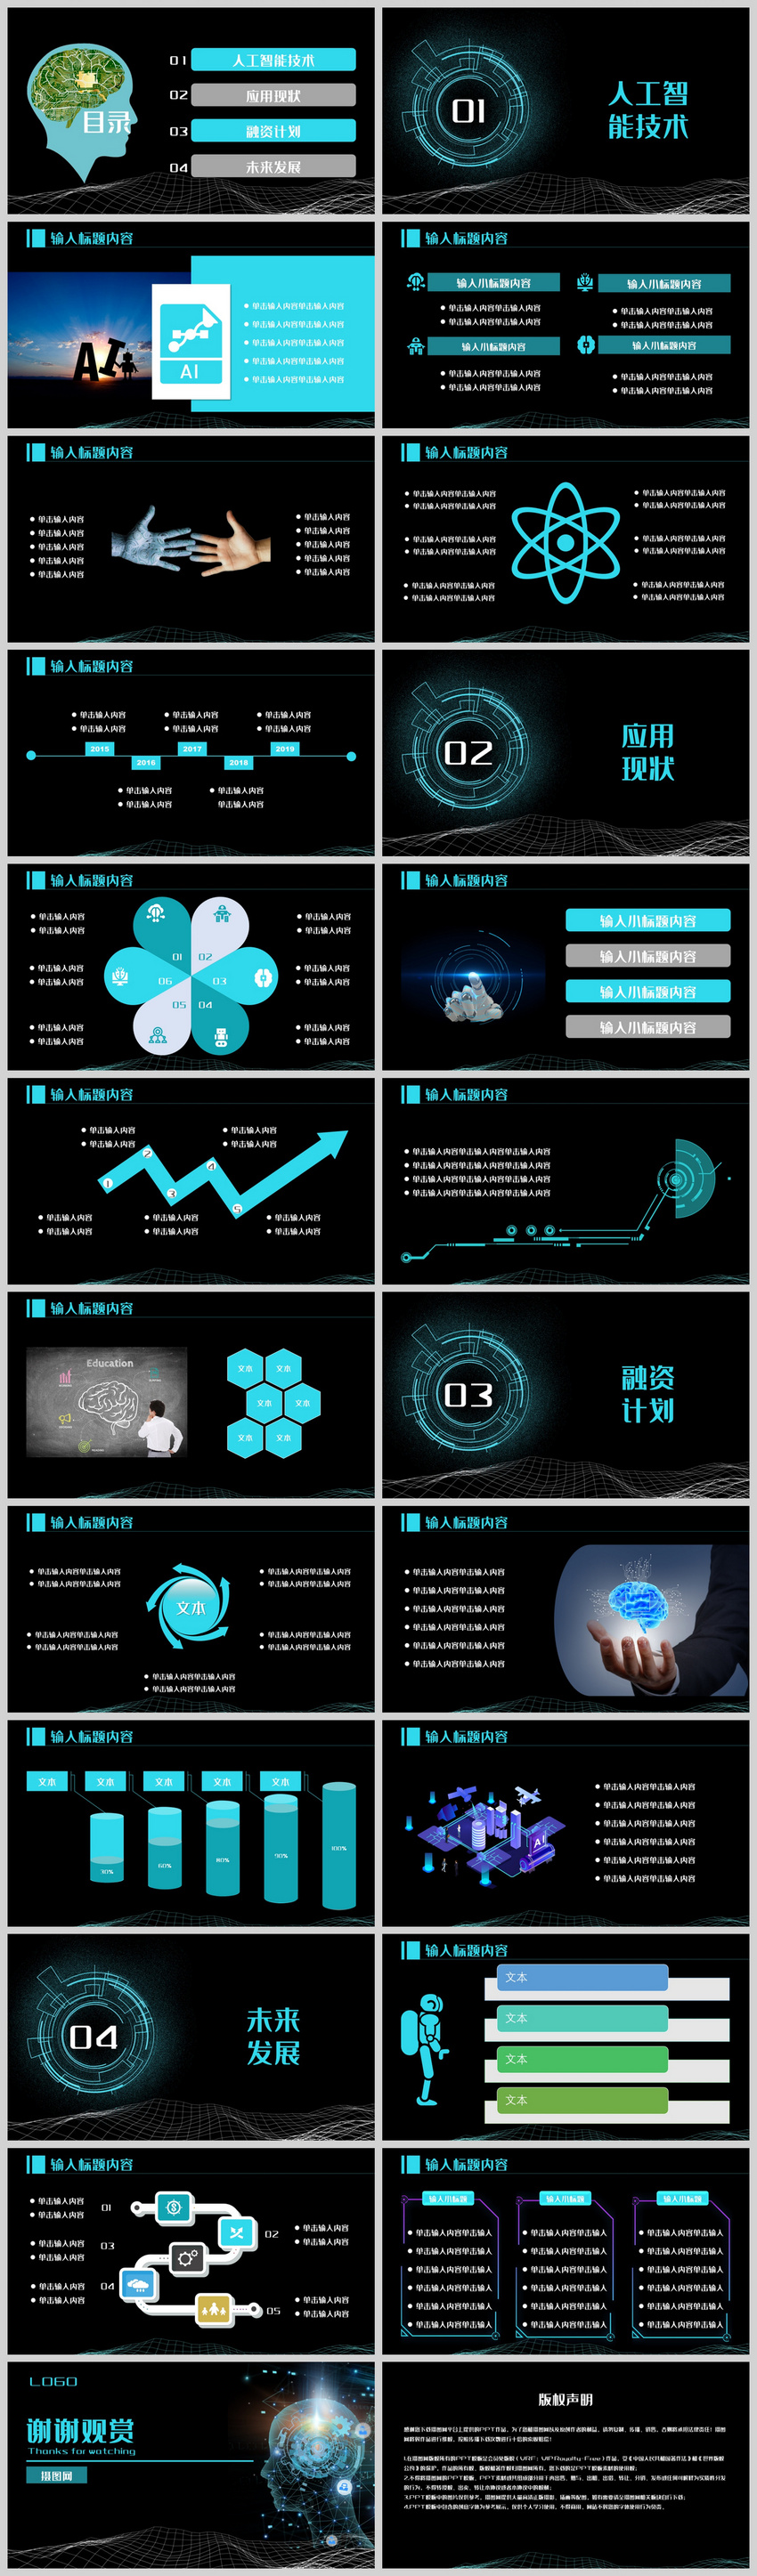 Blue atmosphere artificial intelligence ppt template powerpoint  templete_ppt free download 